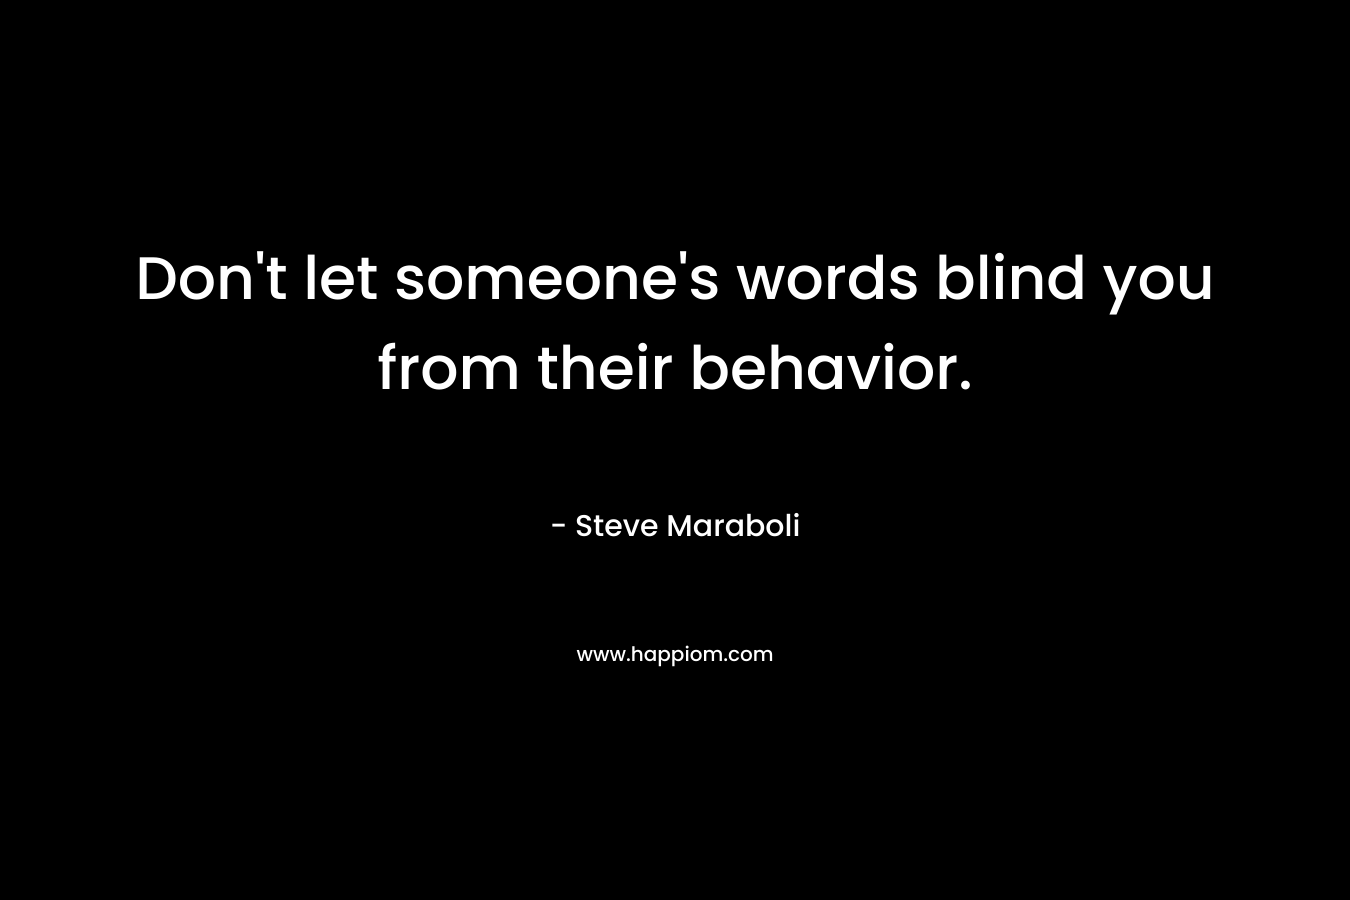 Don't let someone's words blind you from their behavior.